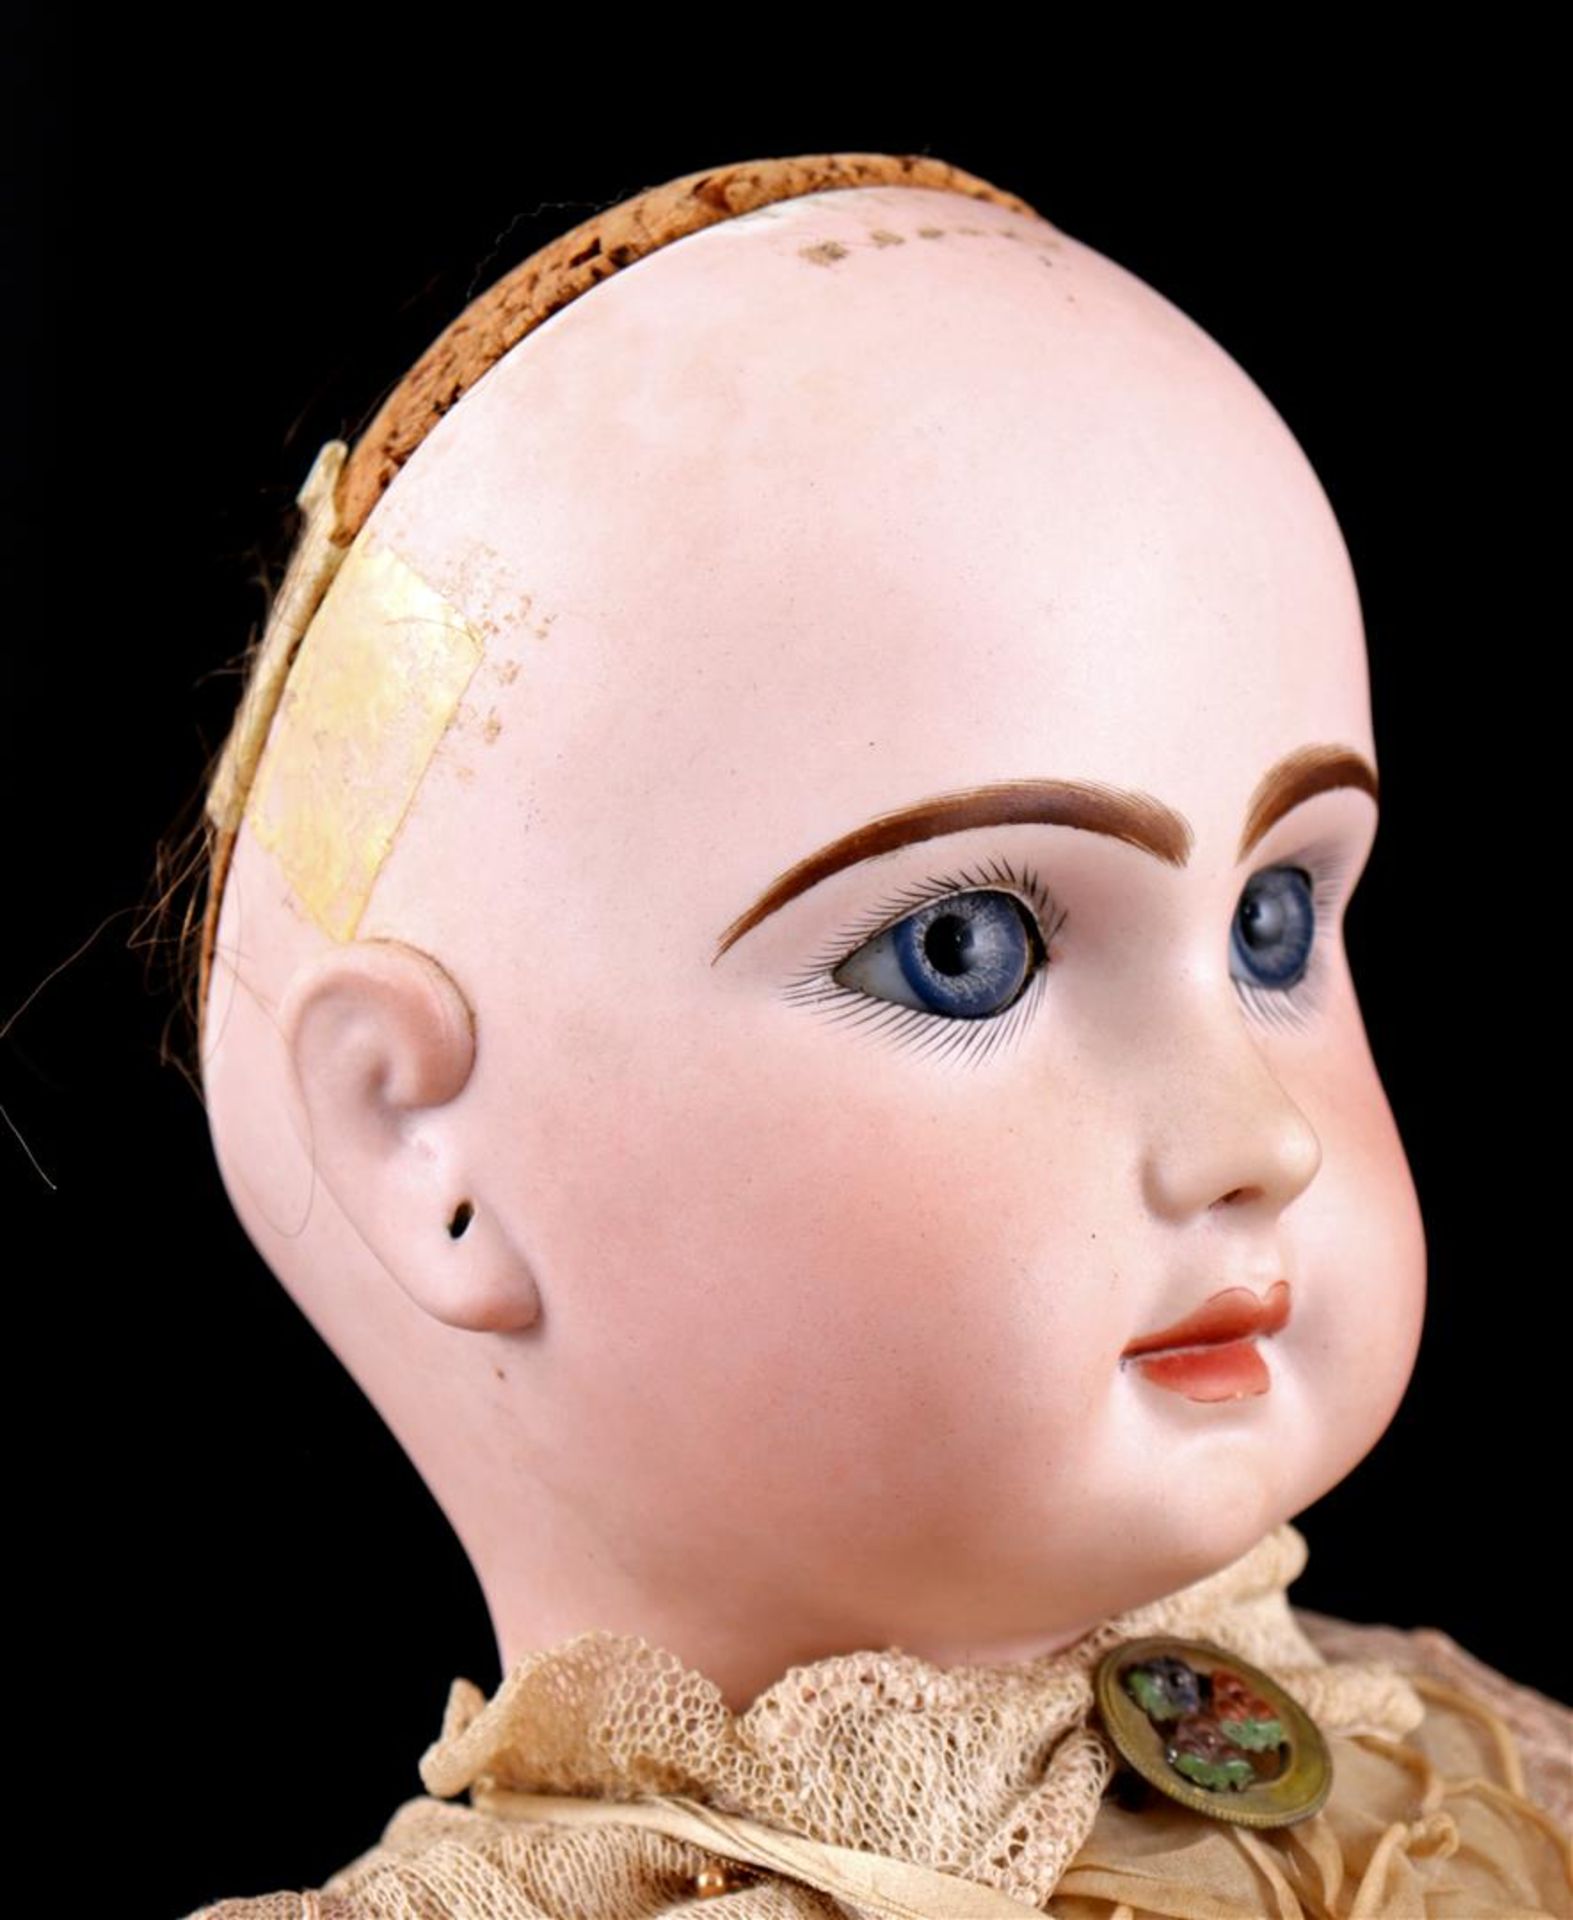 Jumeau doll with closed mouth - Image 4 of 6